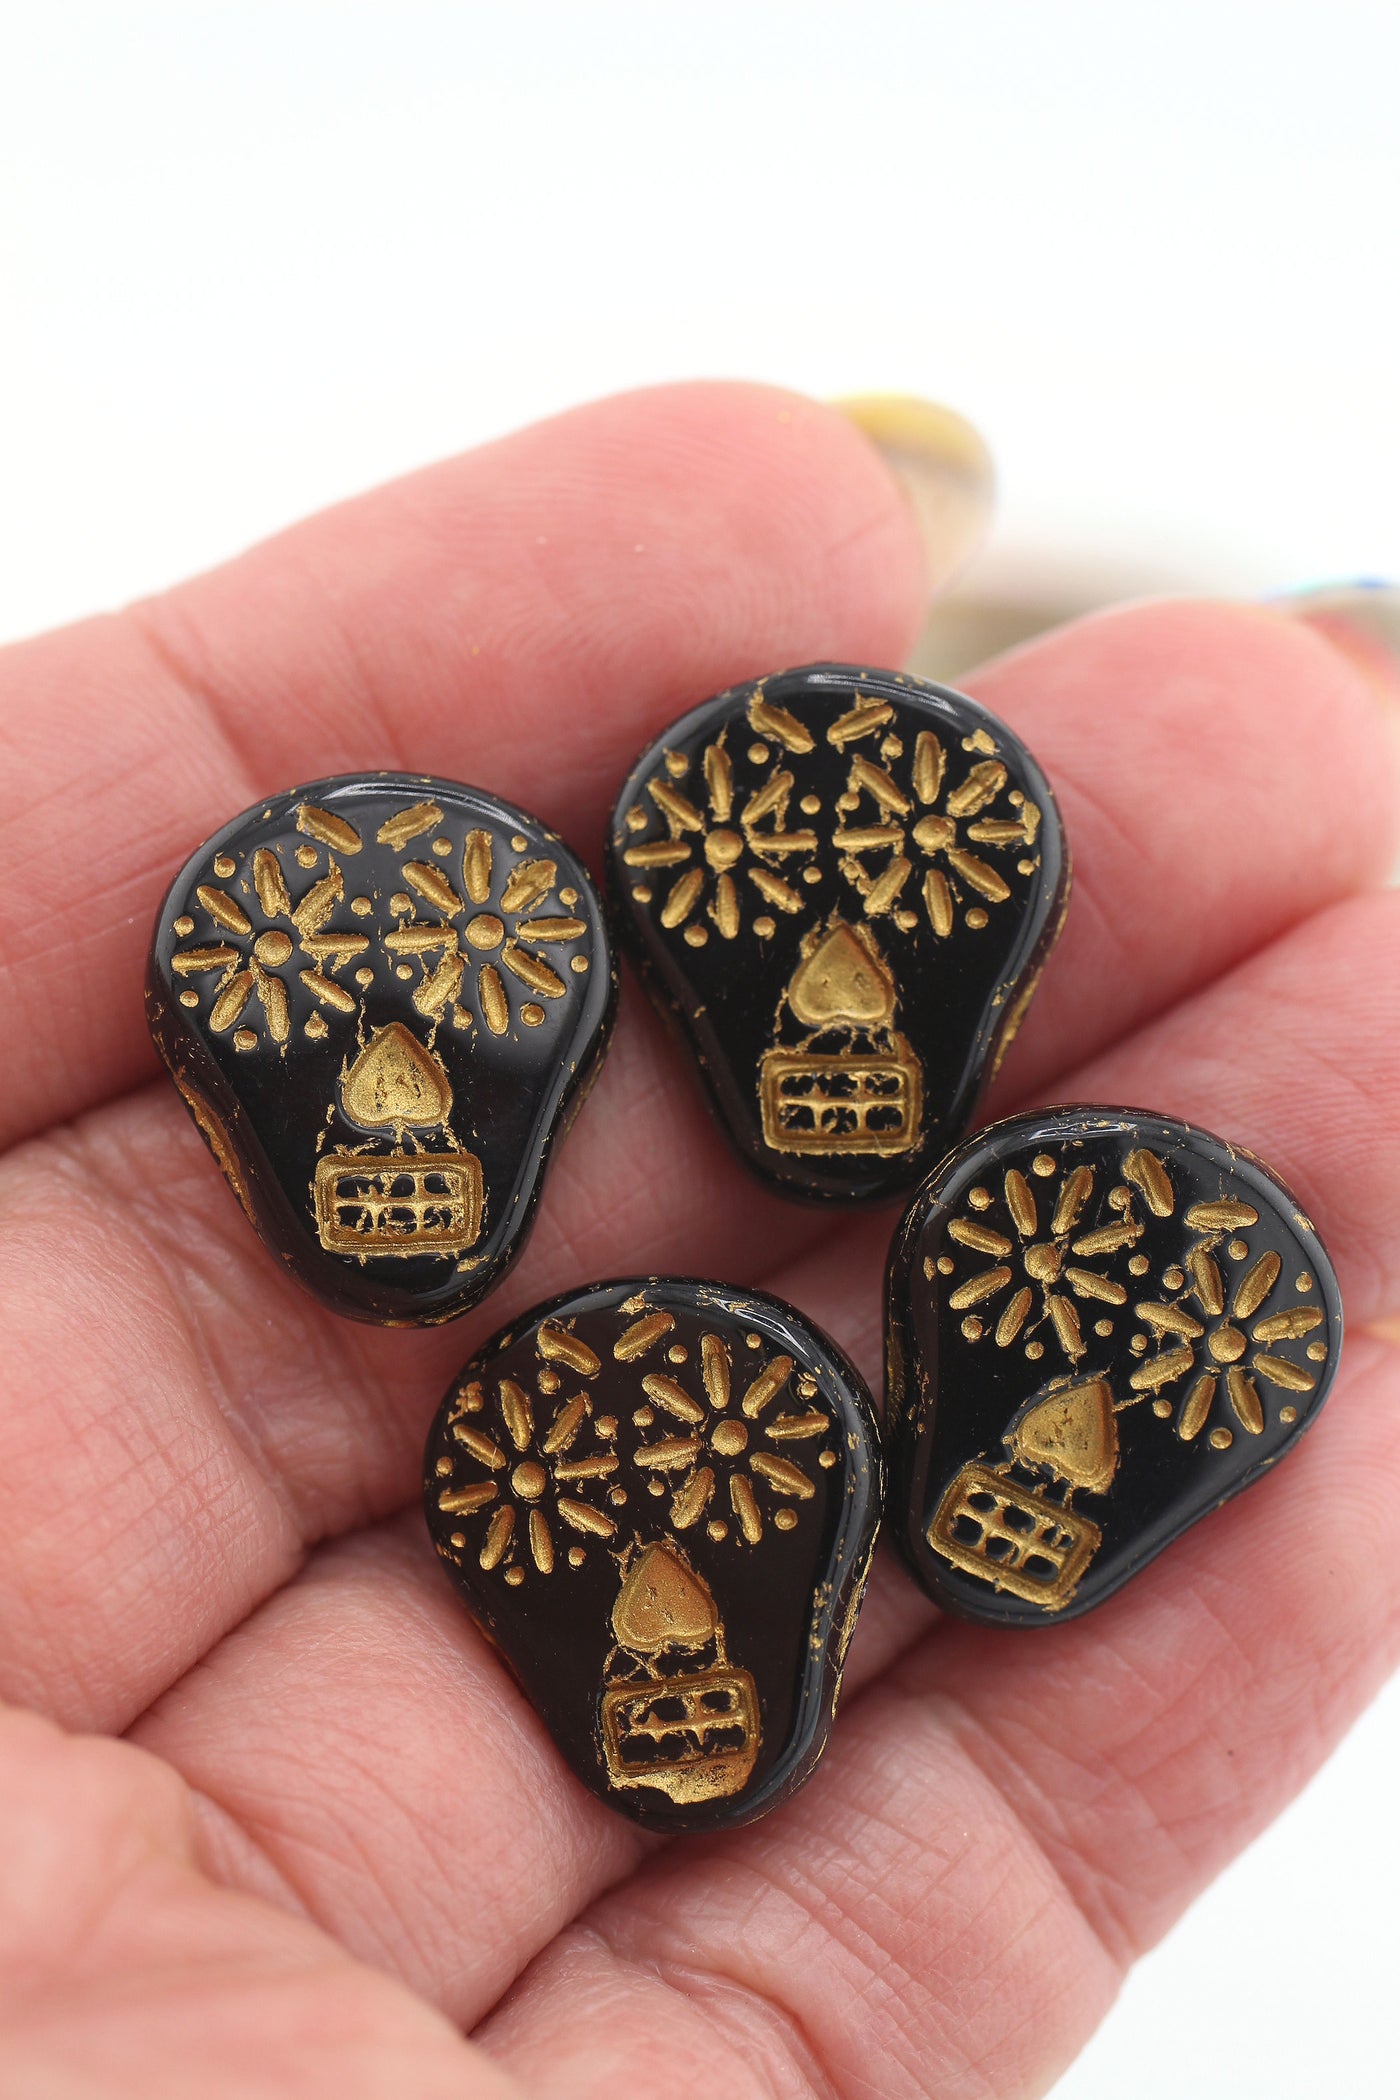 Sugar Skull Beads with Metallic Details, Czech Glass, 4 pieces, 20x16mm for DIY Halloween jewelry